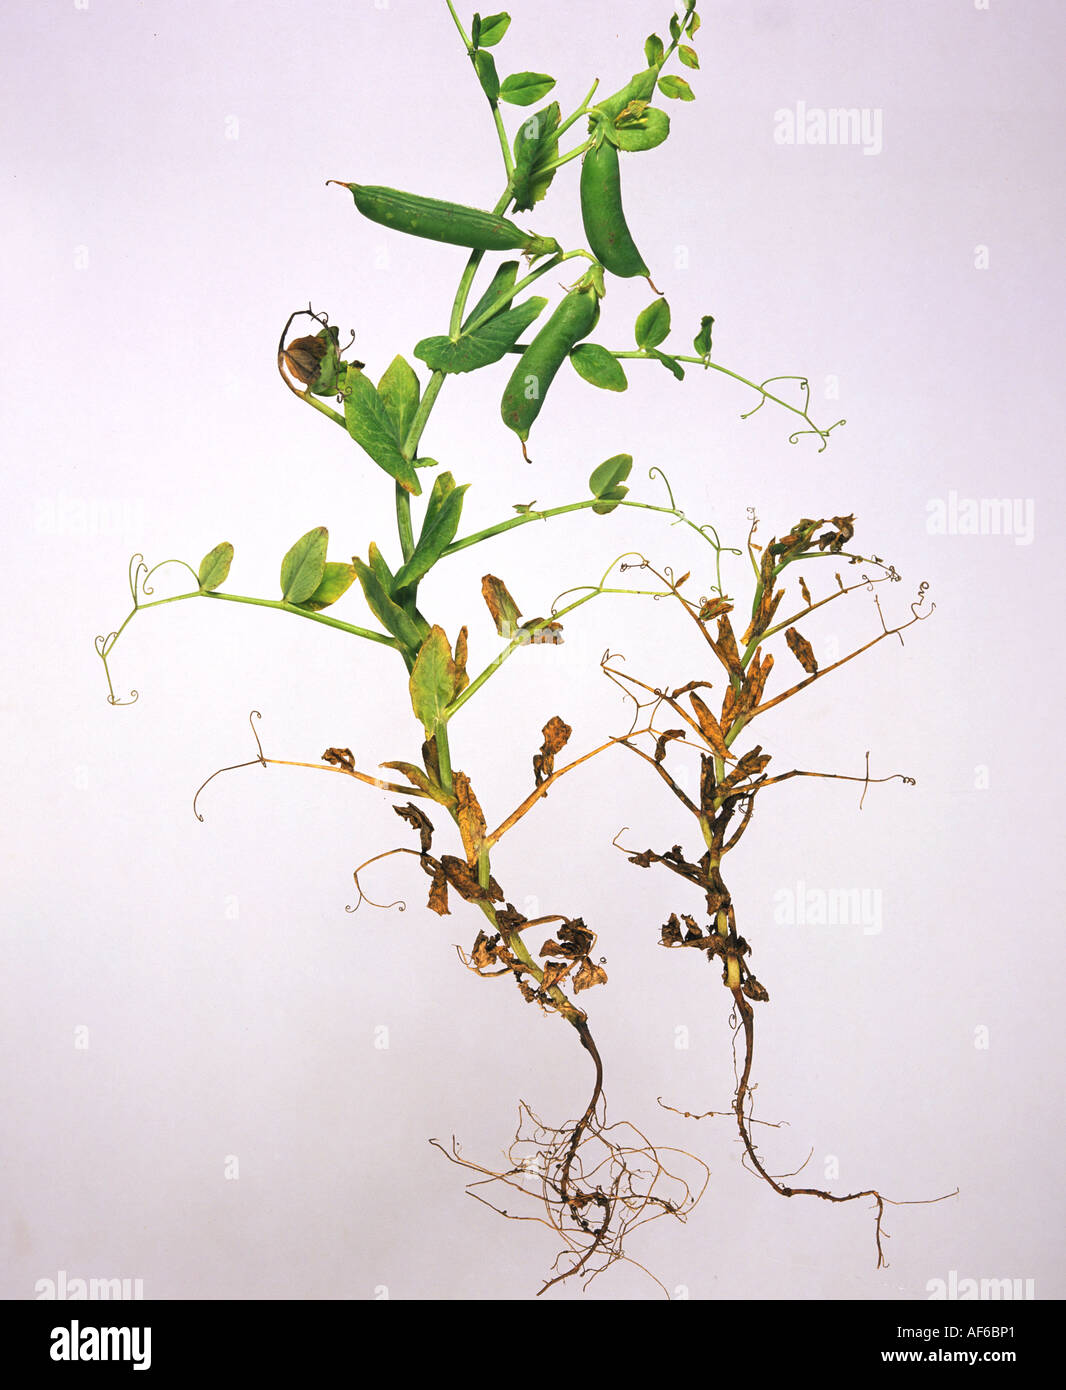 Black root rot Thielaviopsis basicola pea plant with damaged root and stunted growth Stock Photo